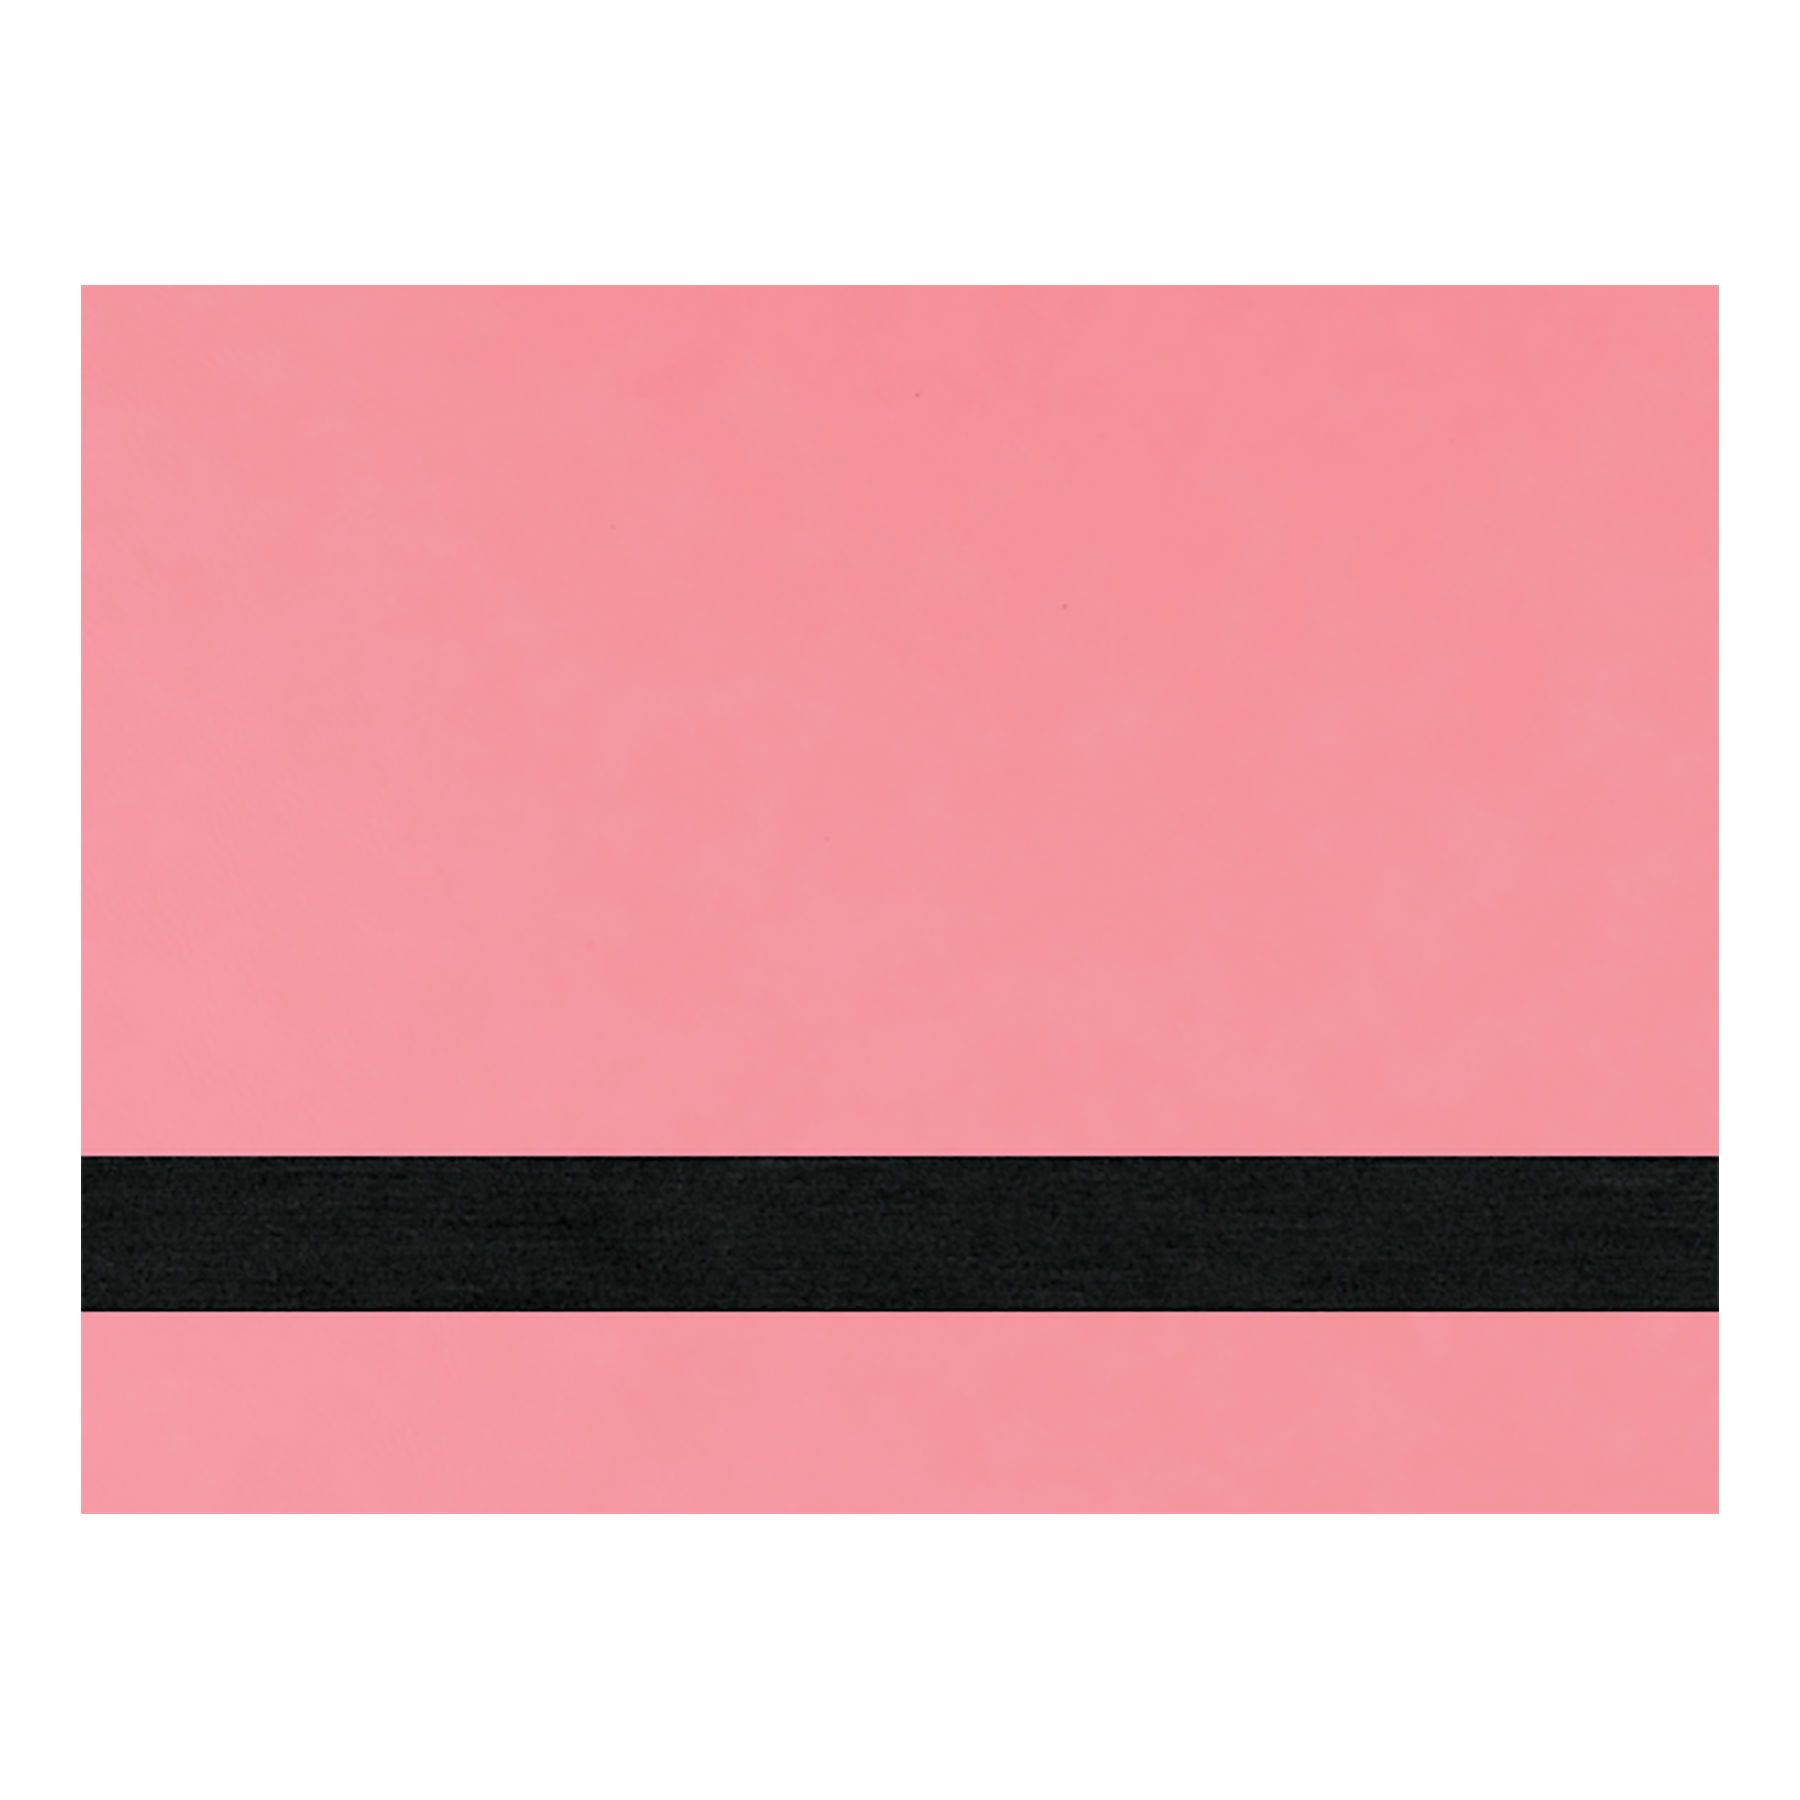 Sheet Stock w/Adhesive Backing, Laserable Leatherette, 6" x 9" Engraving Supplies Craftworks NW Pink/Black 